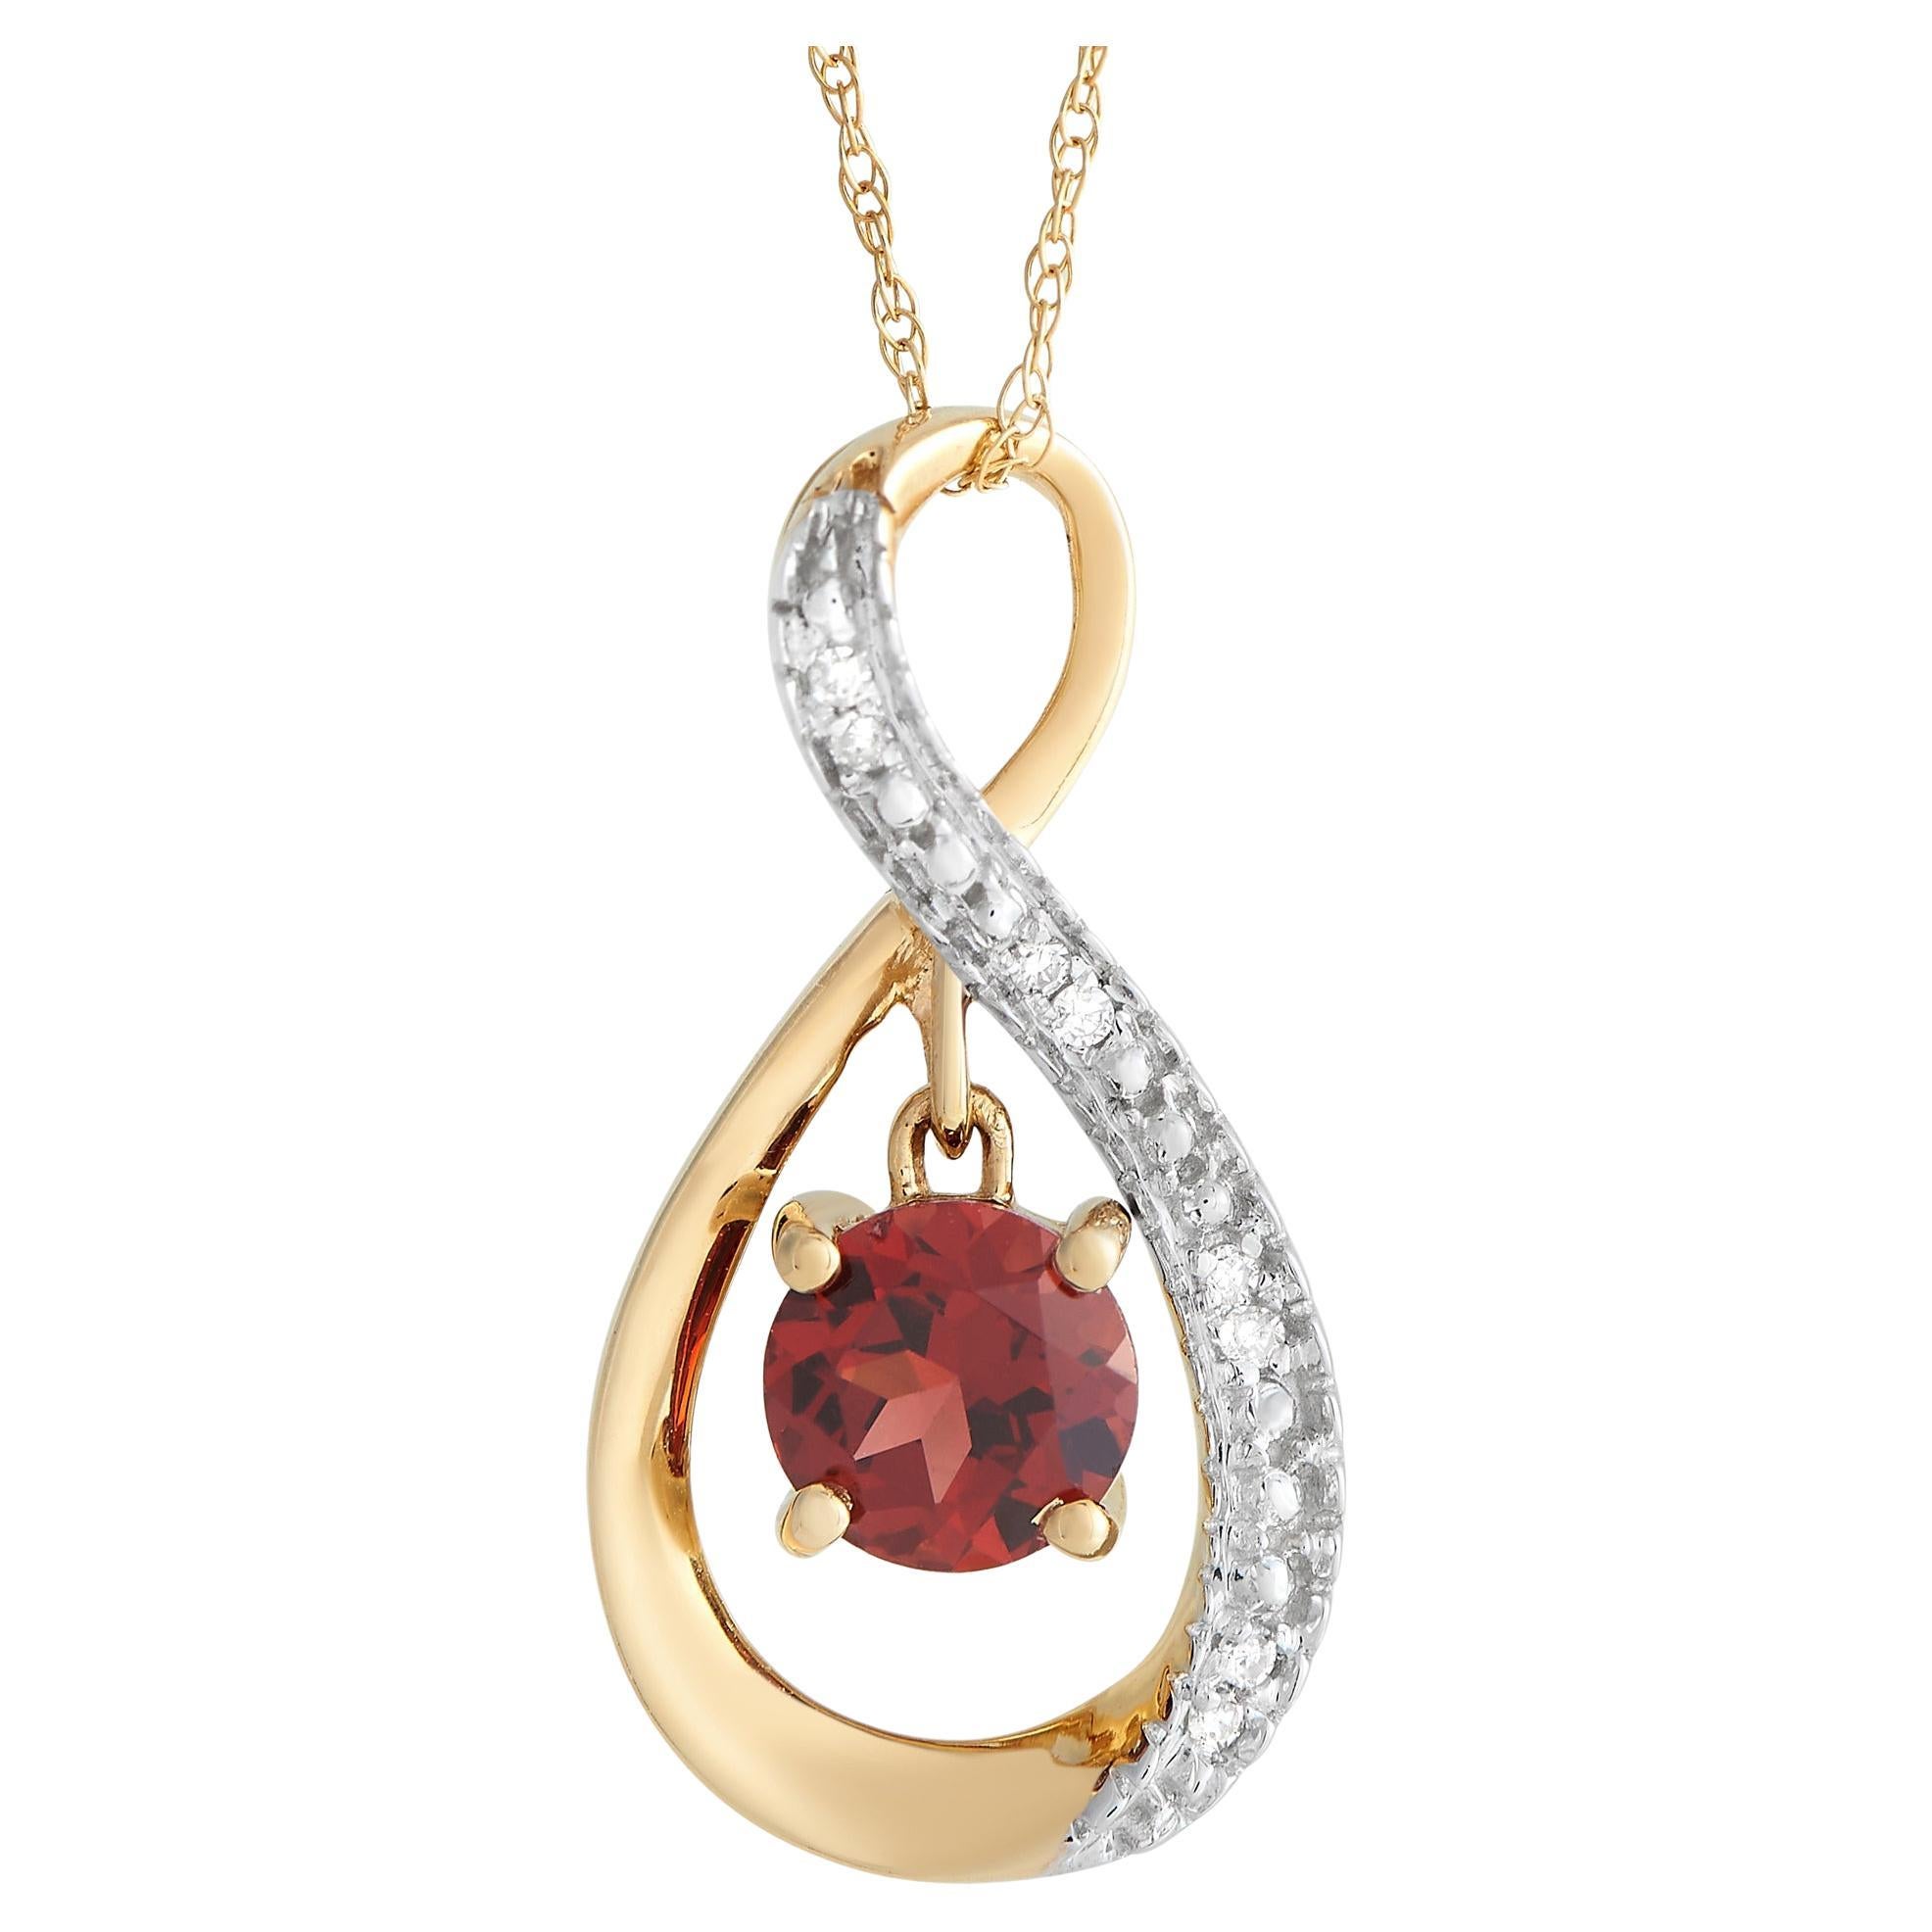 LB Exclusive 14K Yellow Gold 0.03ct Diamond and 0.03 Garnet Necklace